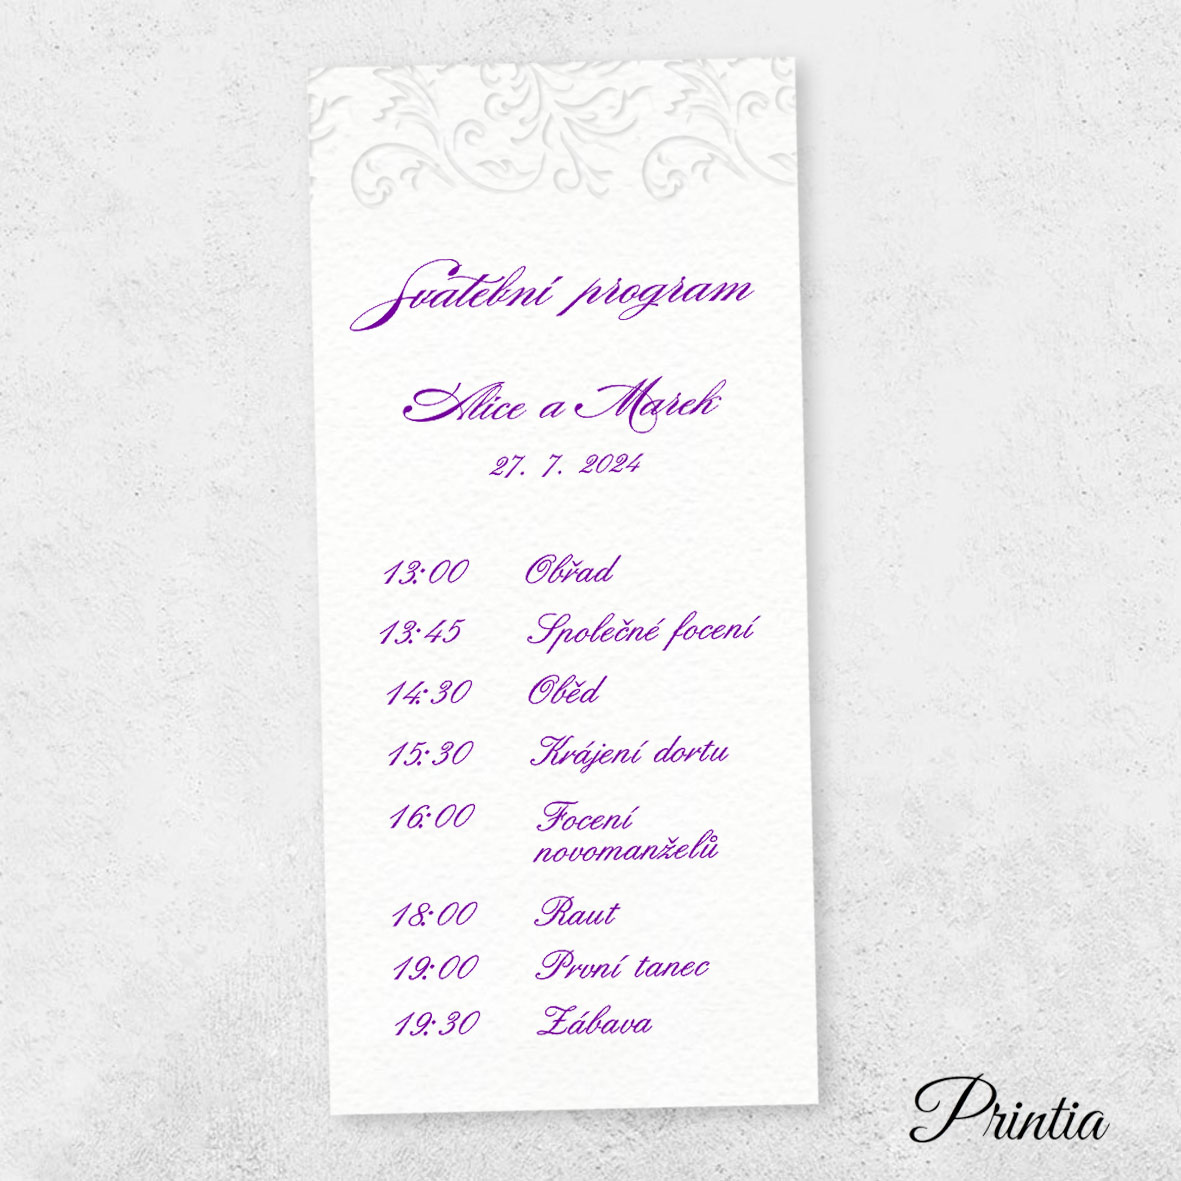 Wedding timeline with embossed ornament